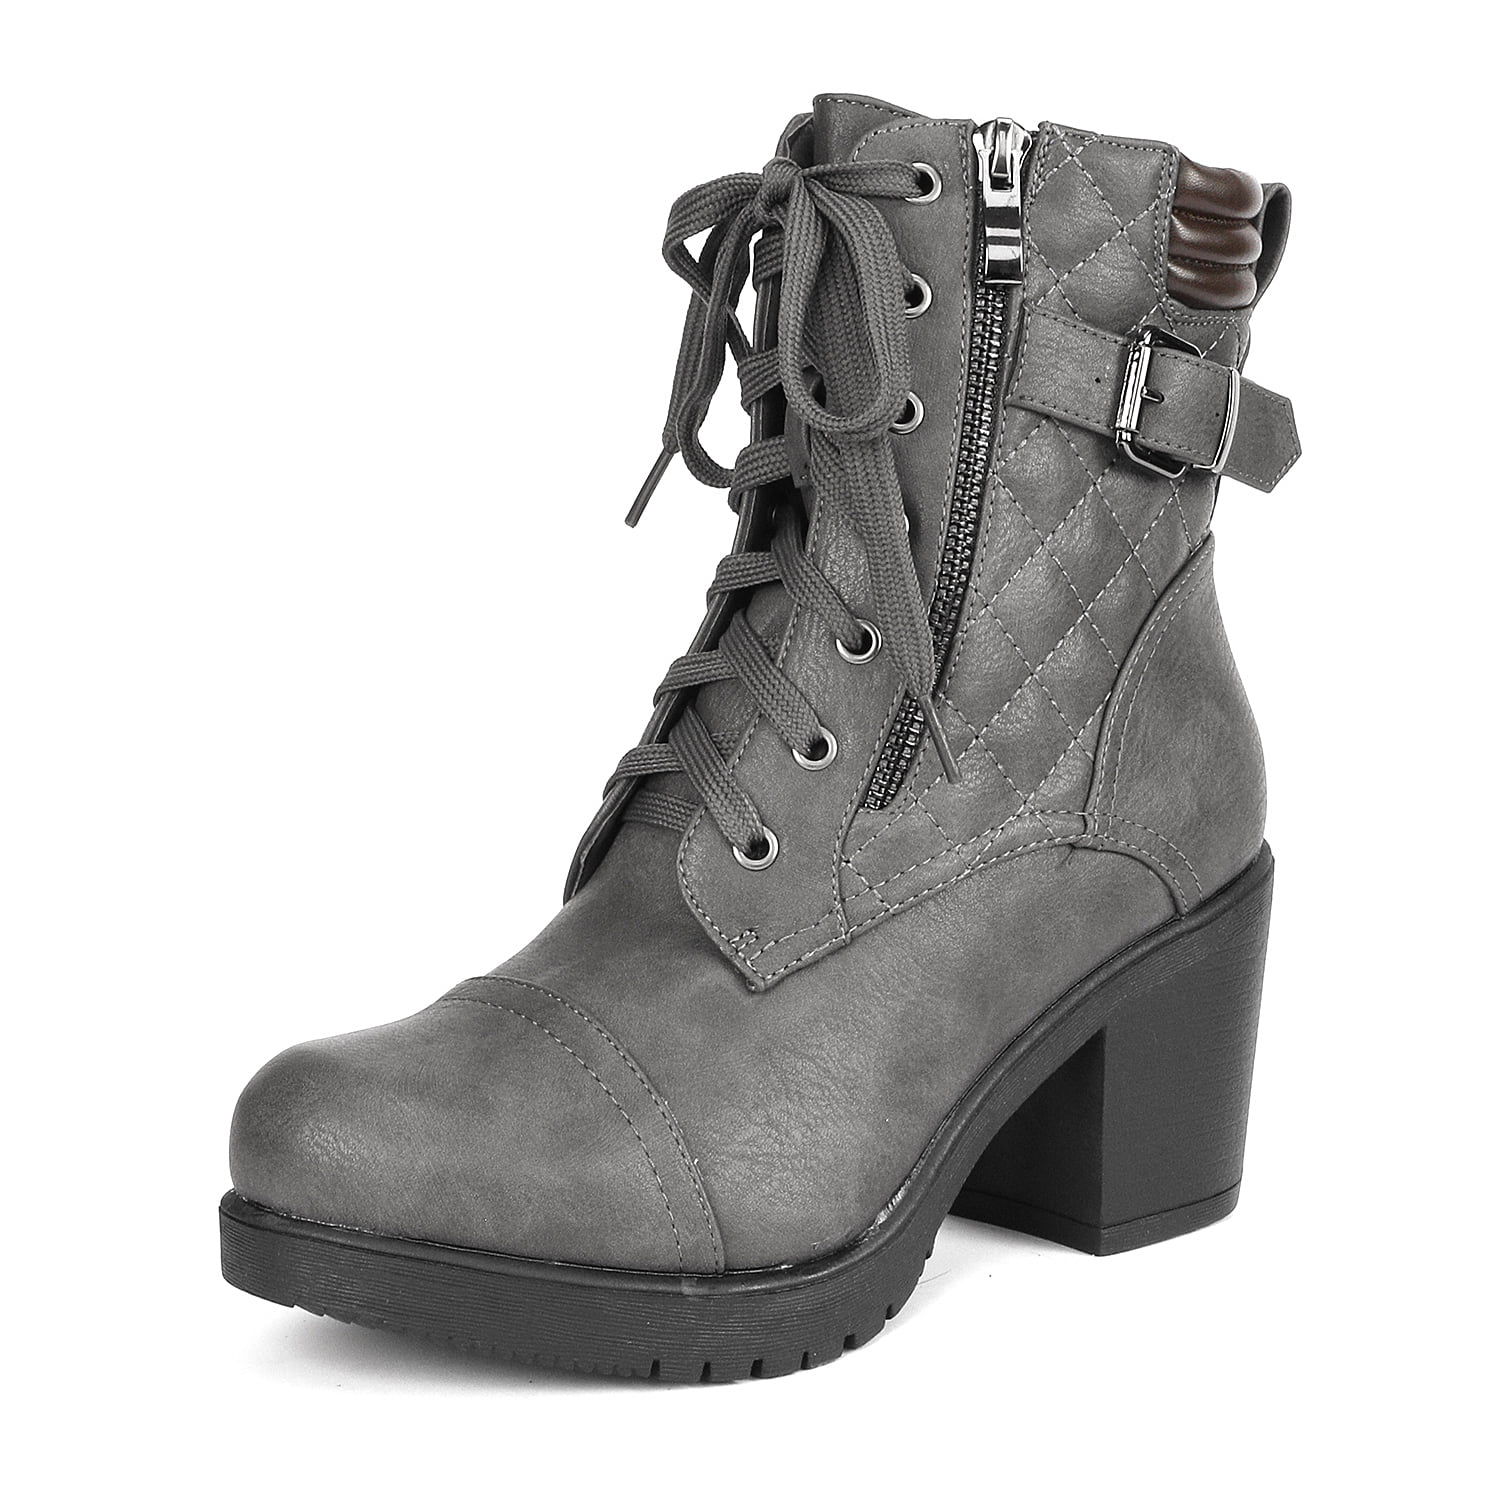 dream pairs women's high heel ankle boots